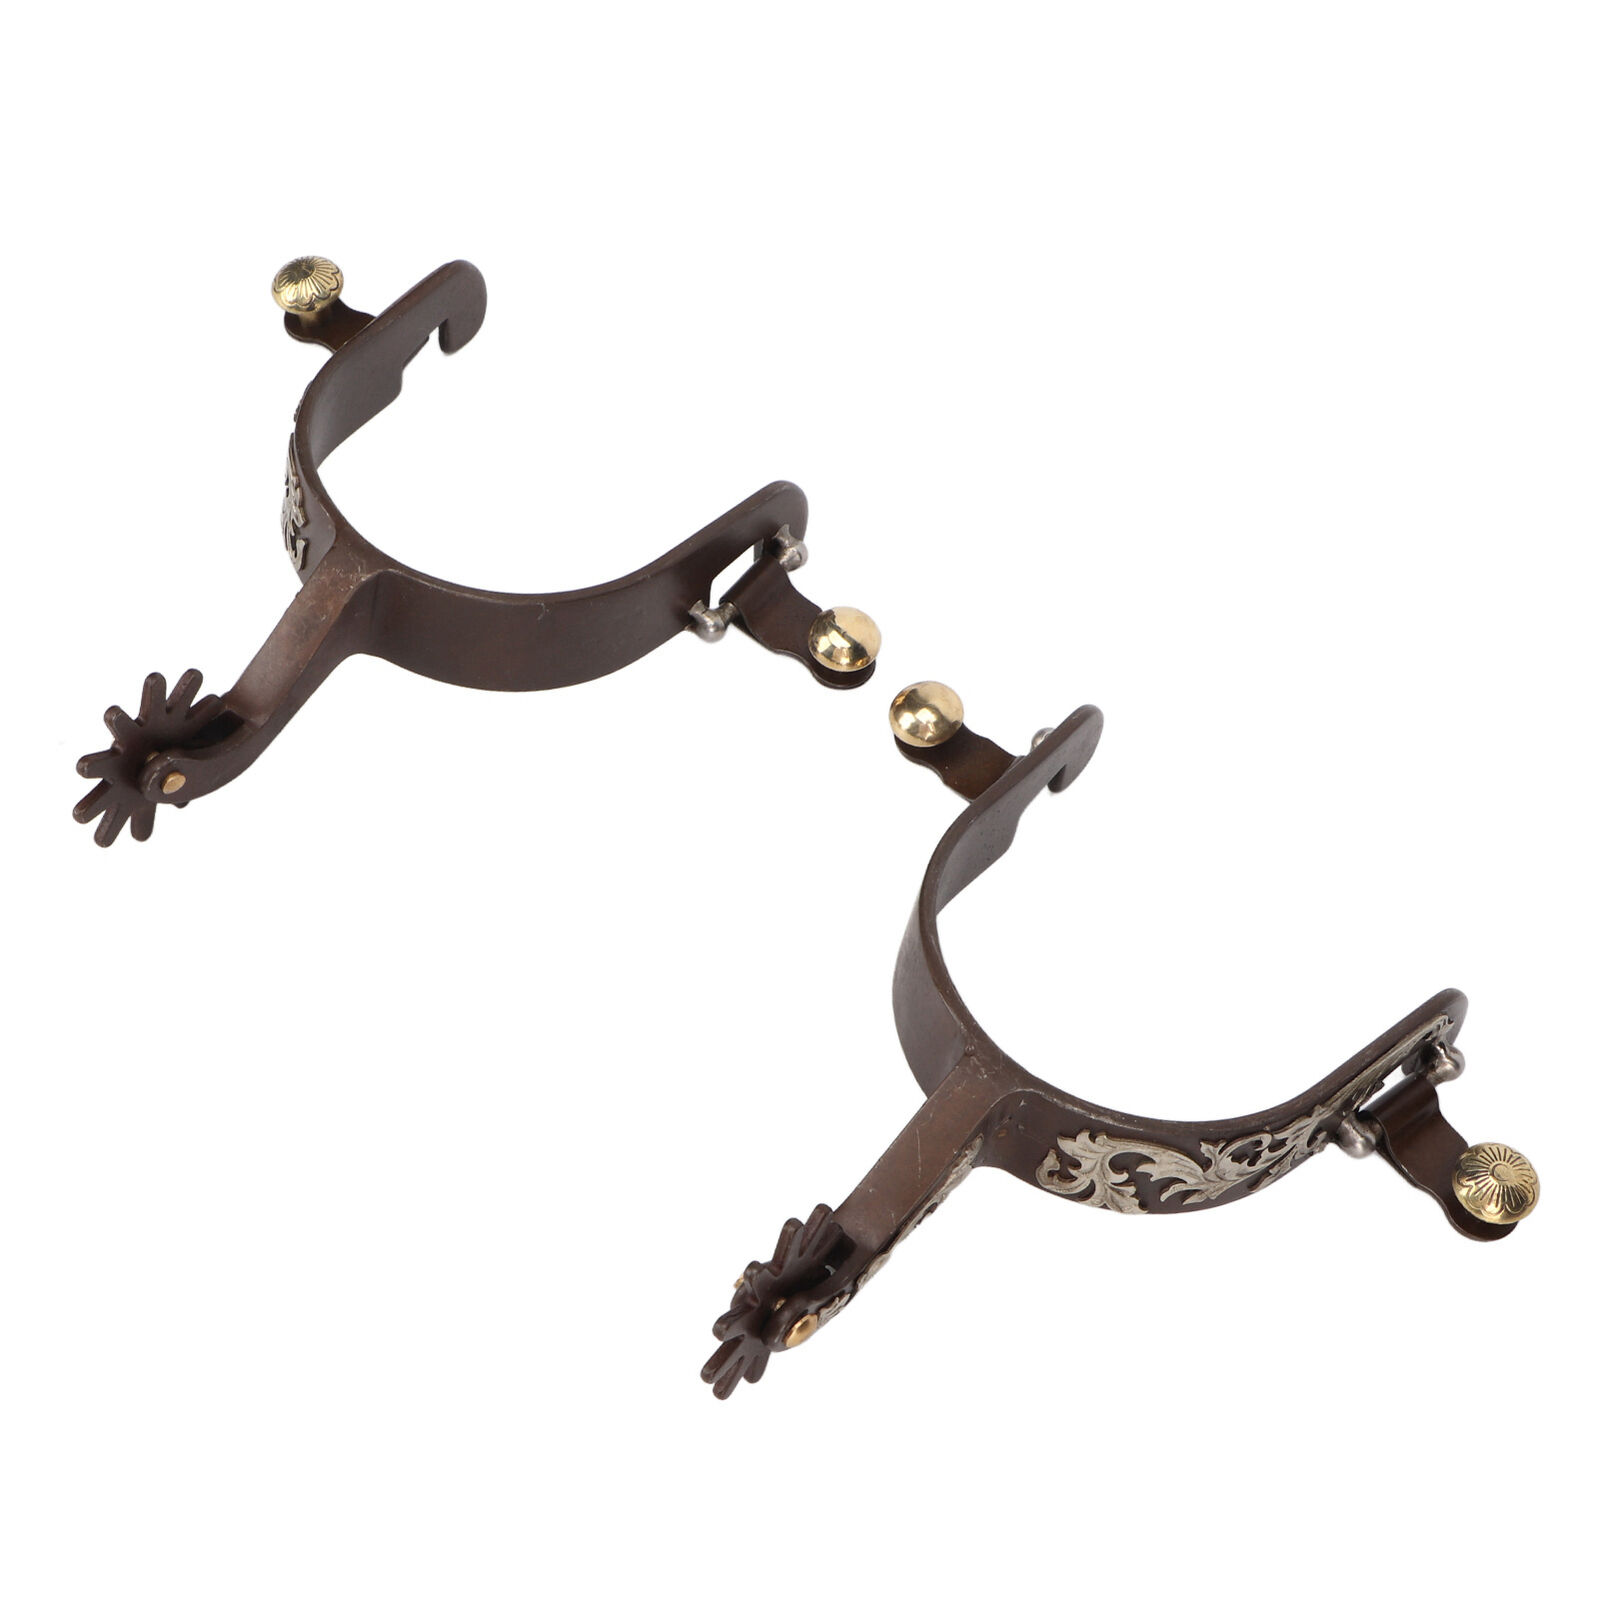 2pcs Vintage Bronze Spurs With Turnable Gear For Horse KRI